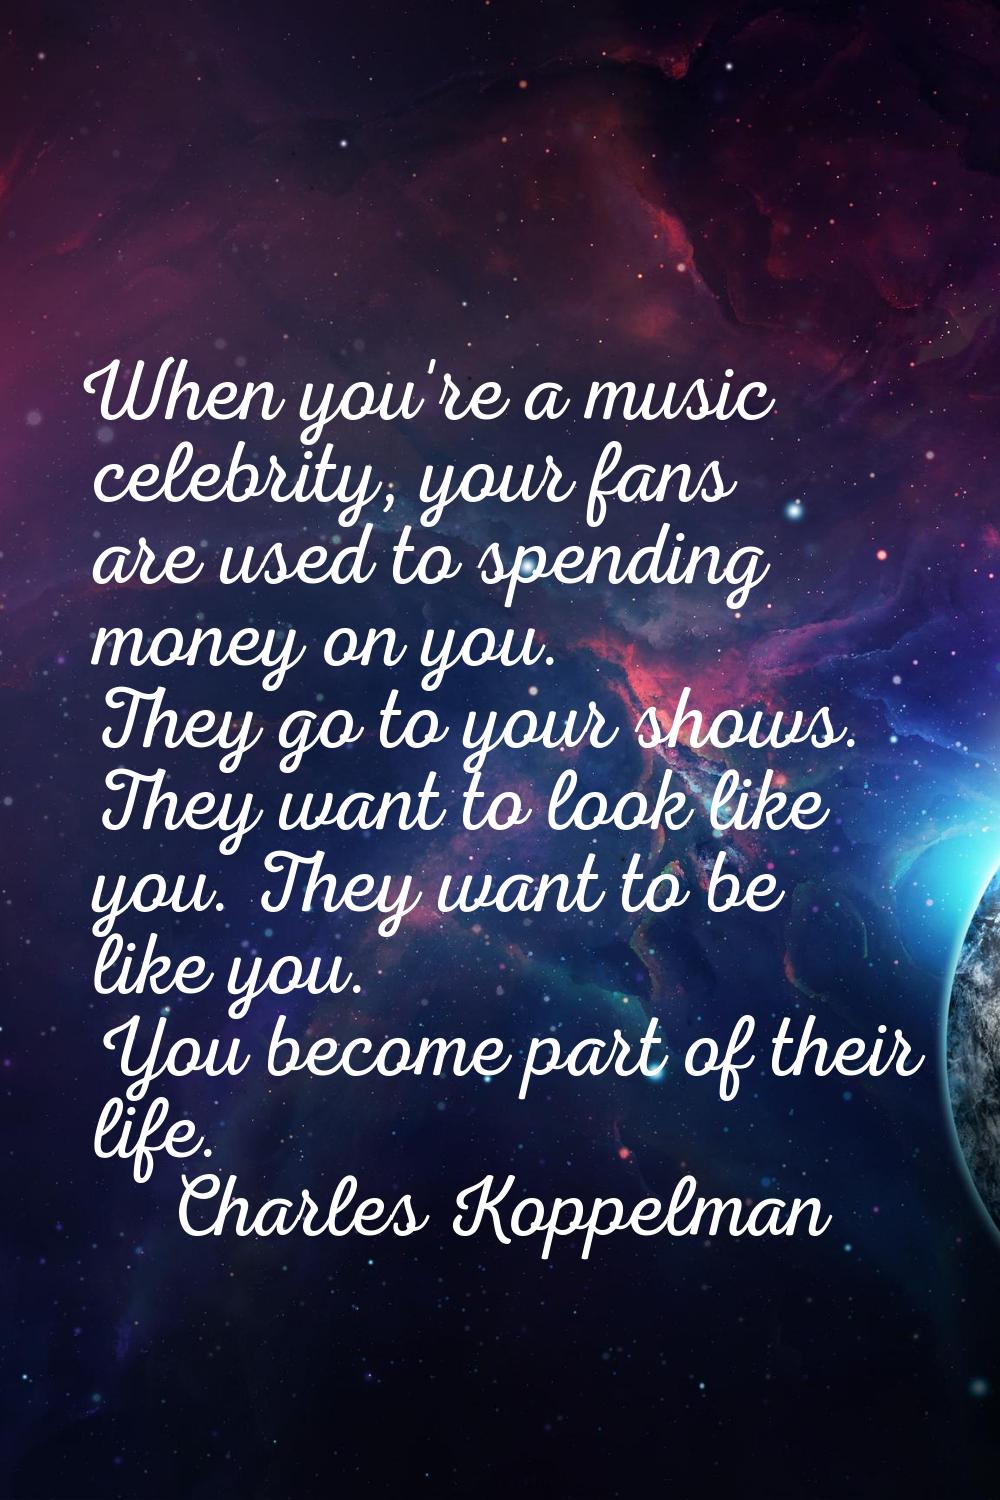 When you're a music celebrity, your fans are used to spending money on you. They go to your shows. 